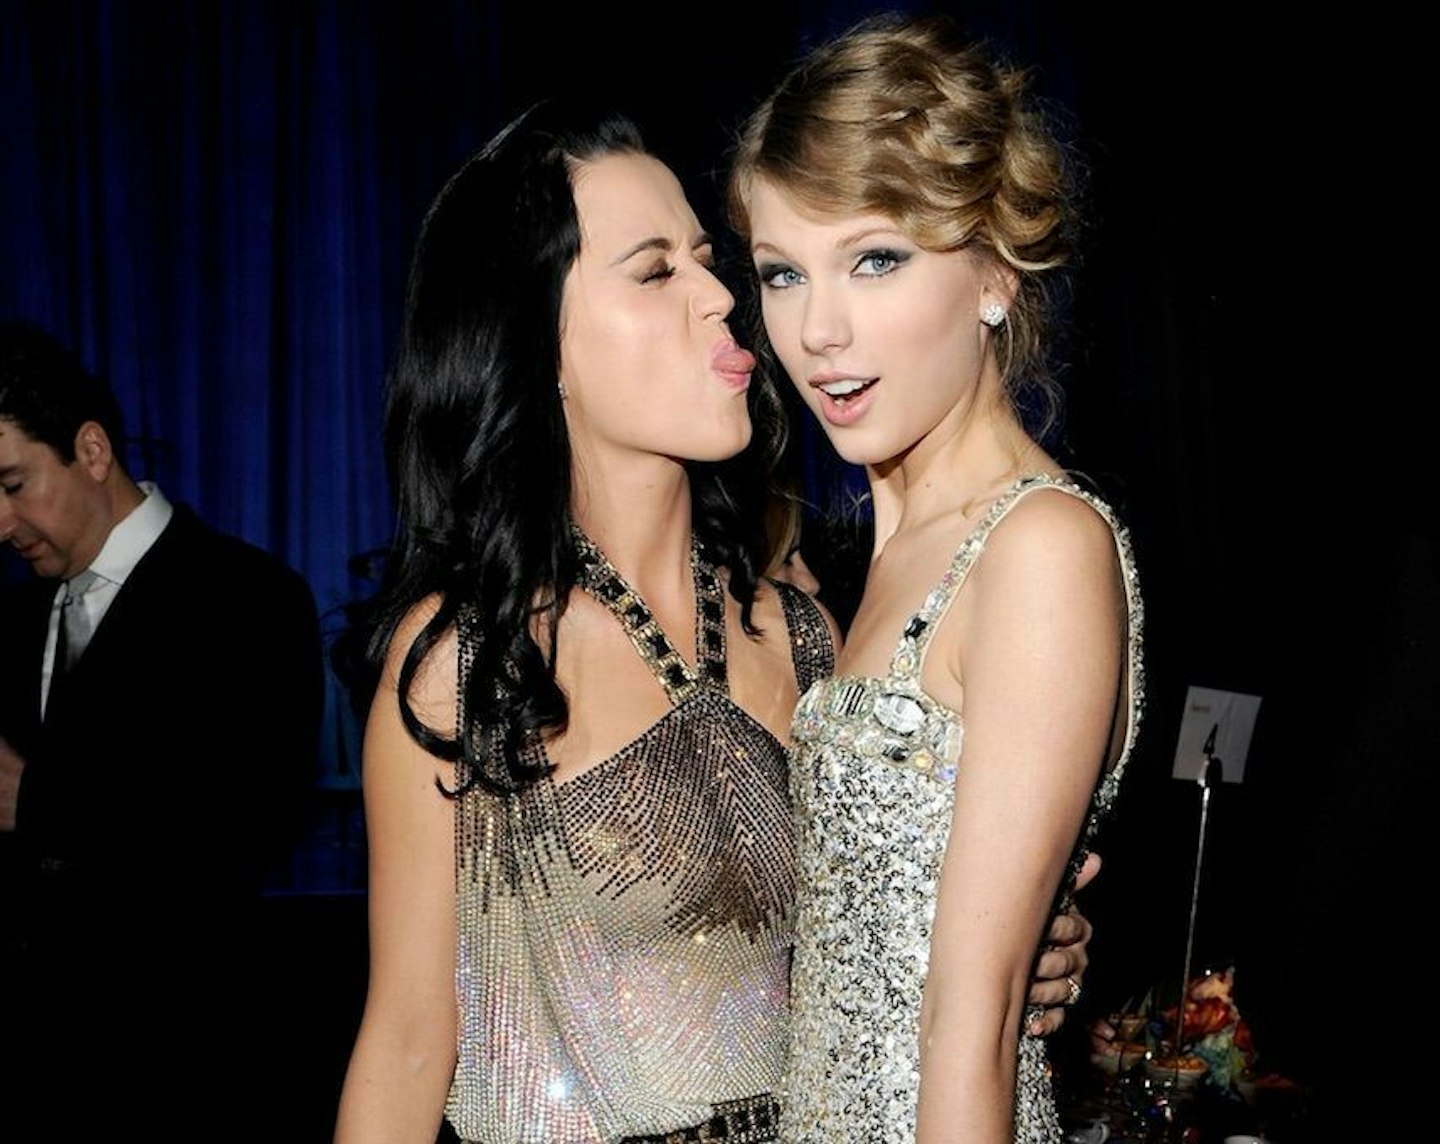 Katy Perry Taylor Swift